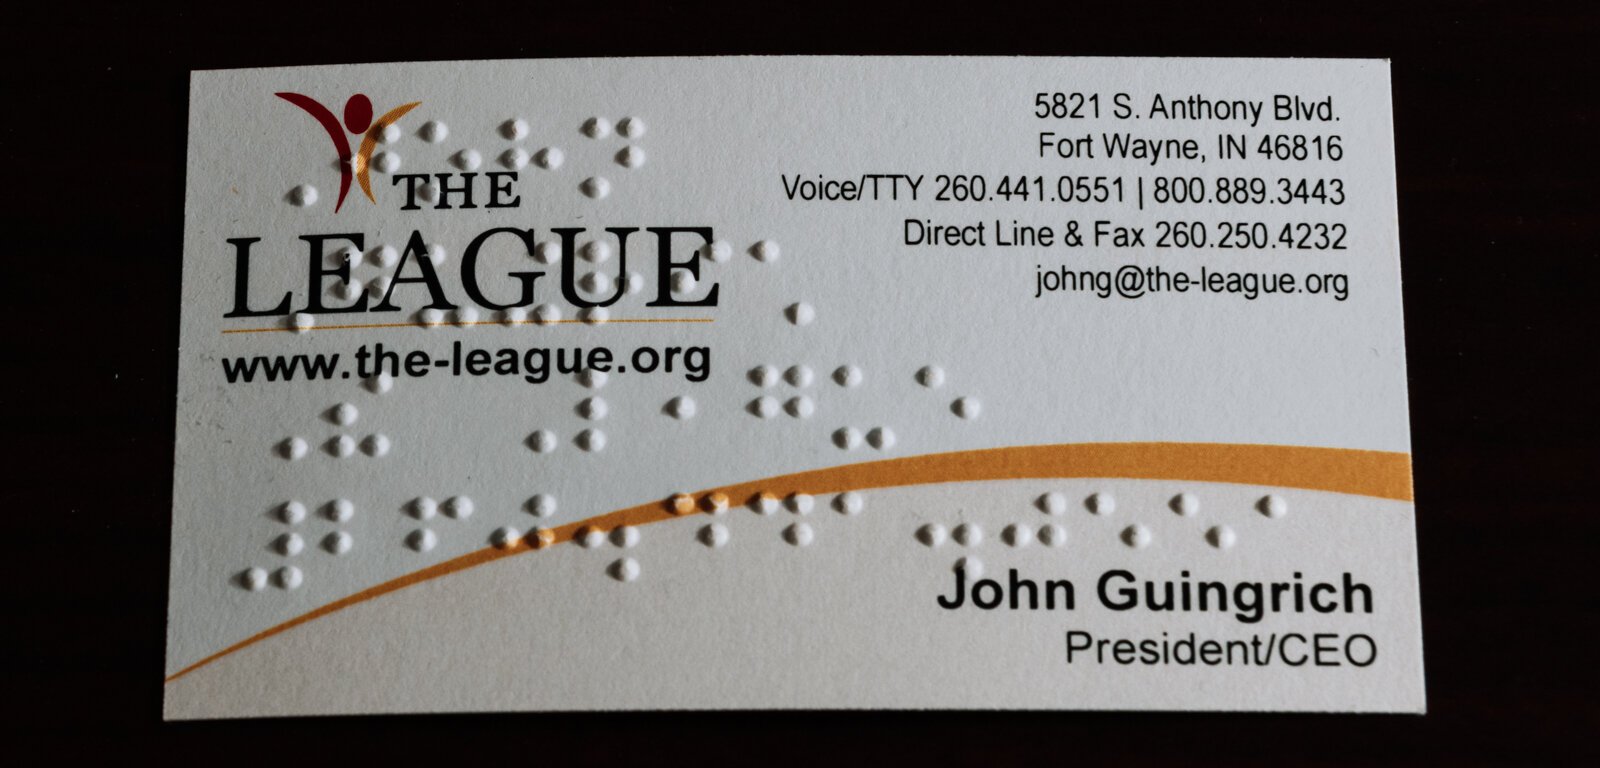 John Guingrich's business card features braille at The League For the Blind - Disabled.